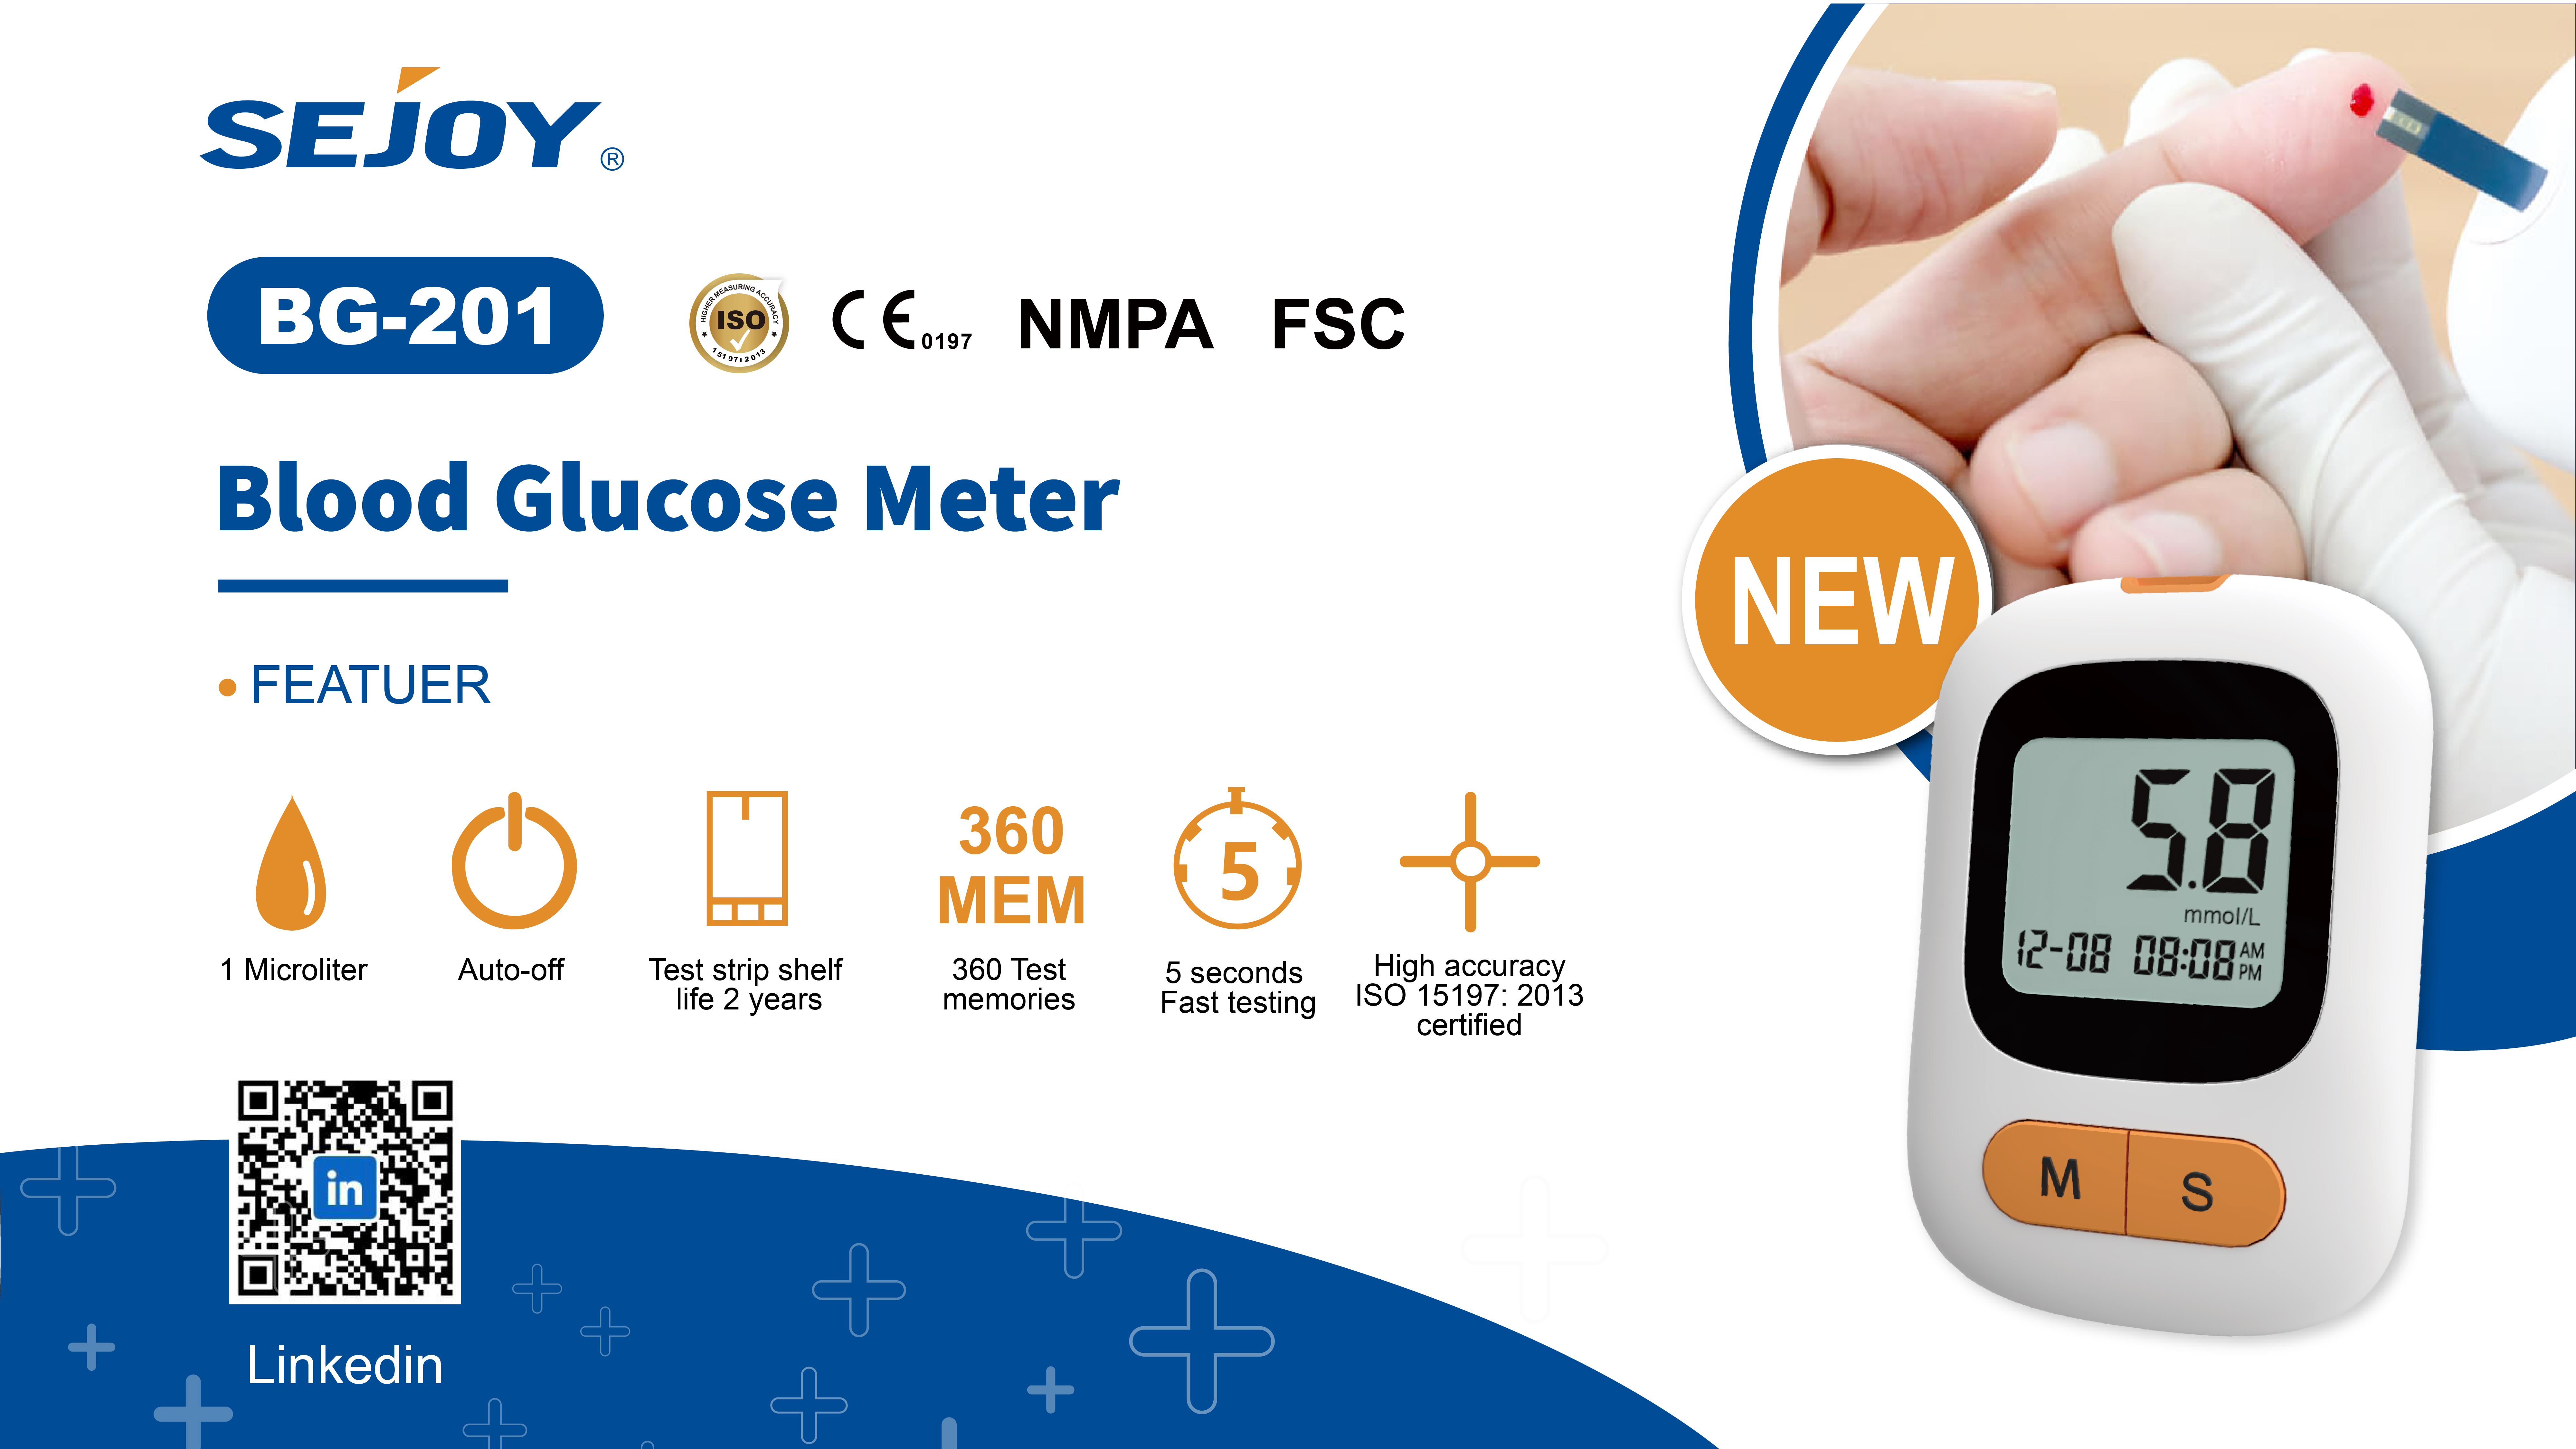 https://www.sejoy.com/blood-glucose-monitoring-system-201-2-2-product/